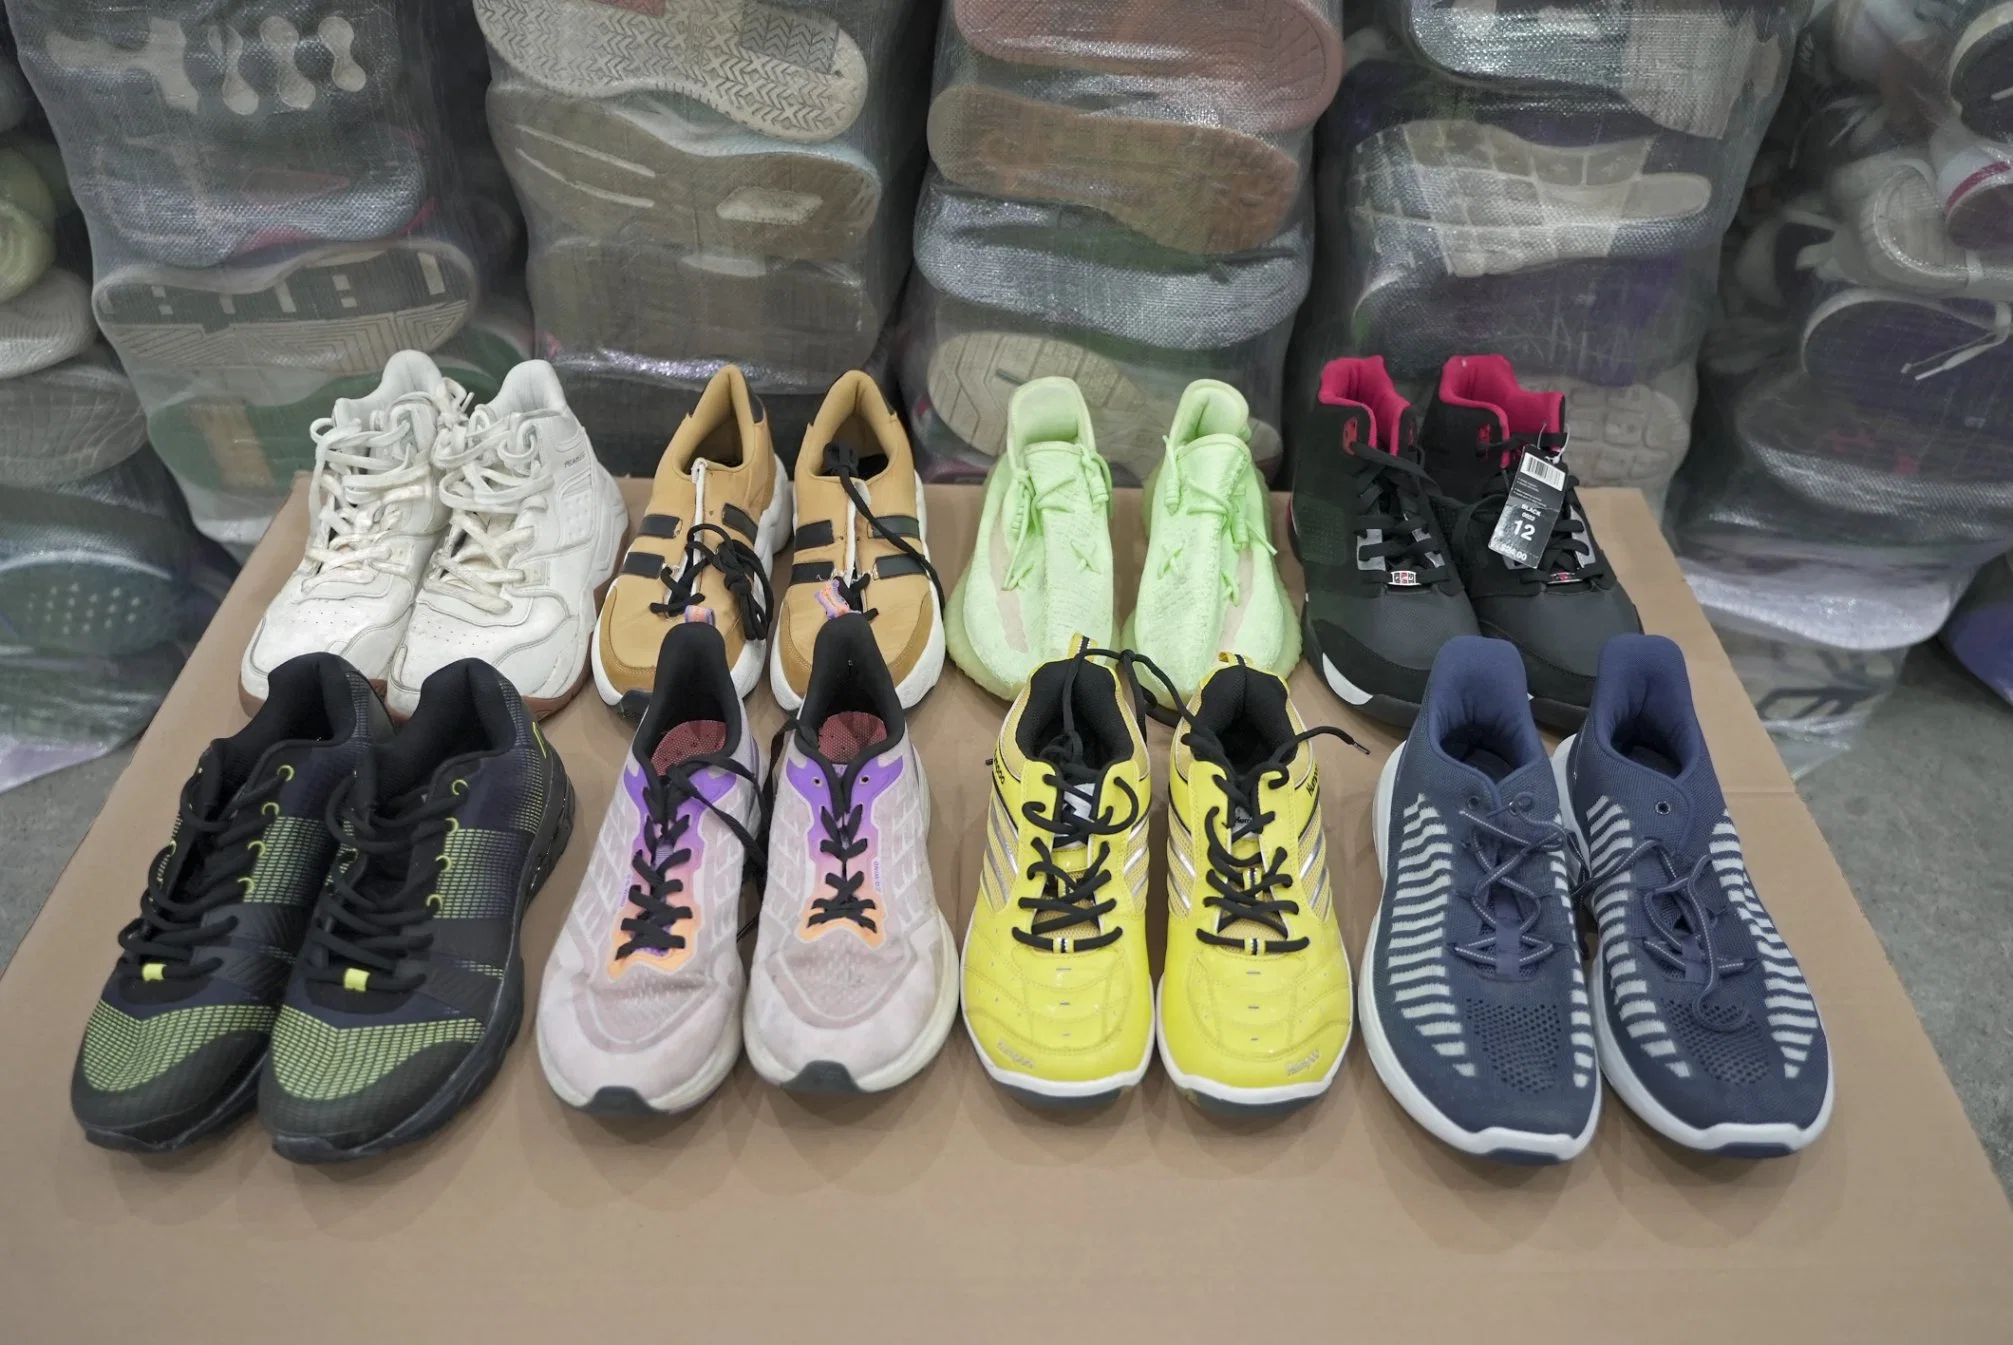 Wholesale Cheap Price Well-Sorted Grade a+ Summer Branded Design Used Branded Original Shoe USA Second Hands Sports Sneakers Shoe Bales Used Brand Shoe